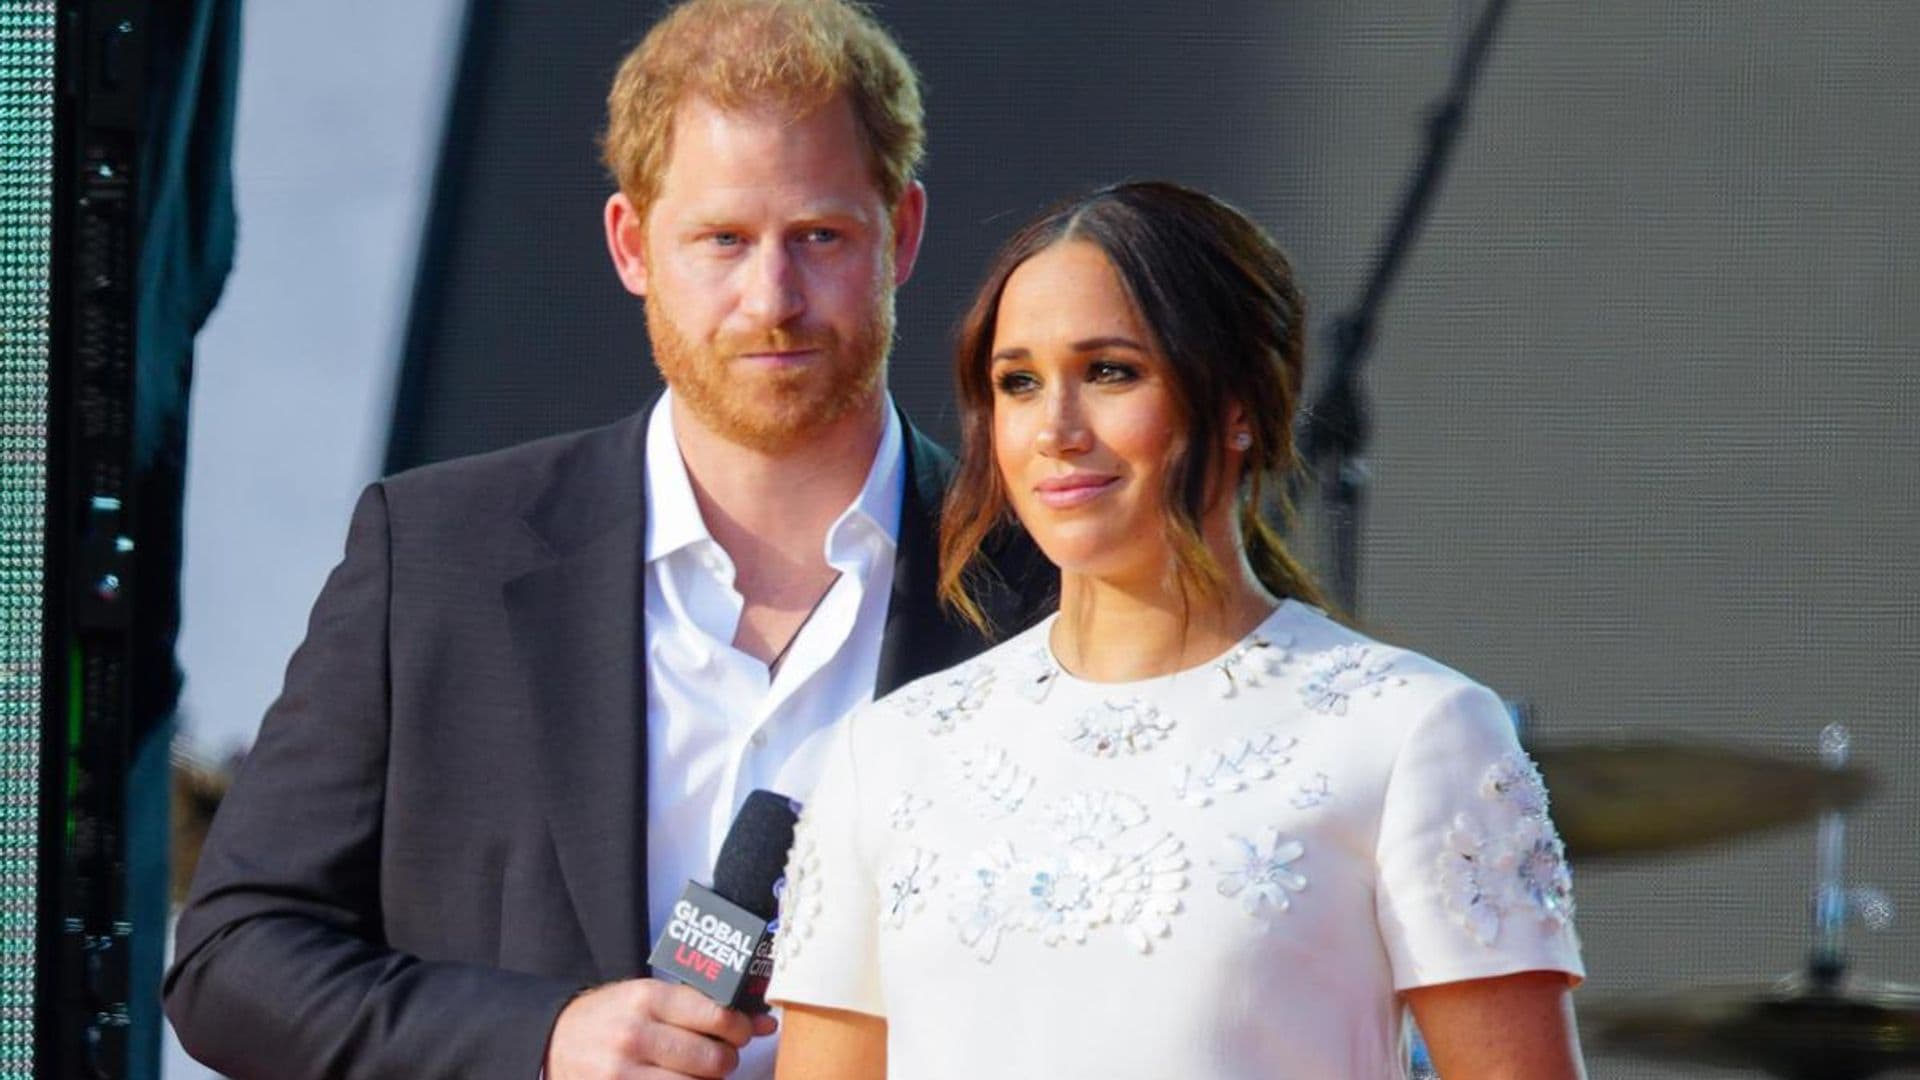 Were Meghan Markle and Prince Harry's indivdual about pages removed from the royal family's website?